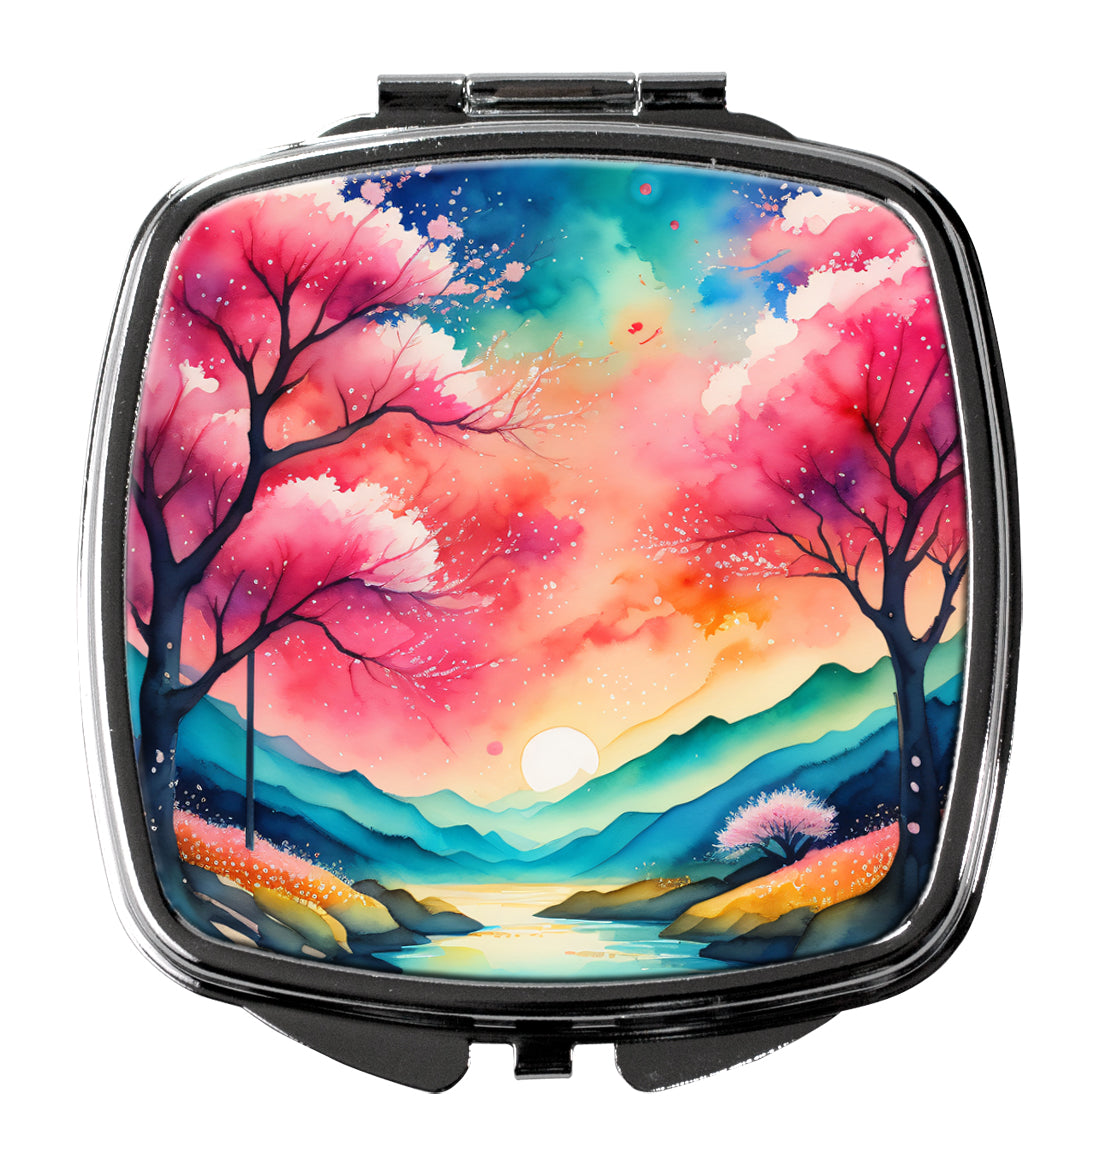 Buy this Colorful Cherry Blossoms Compact Mirror